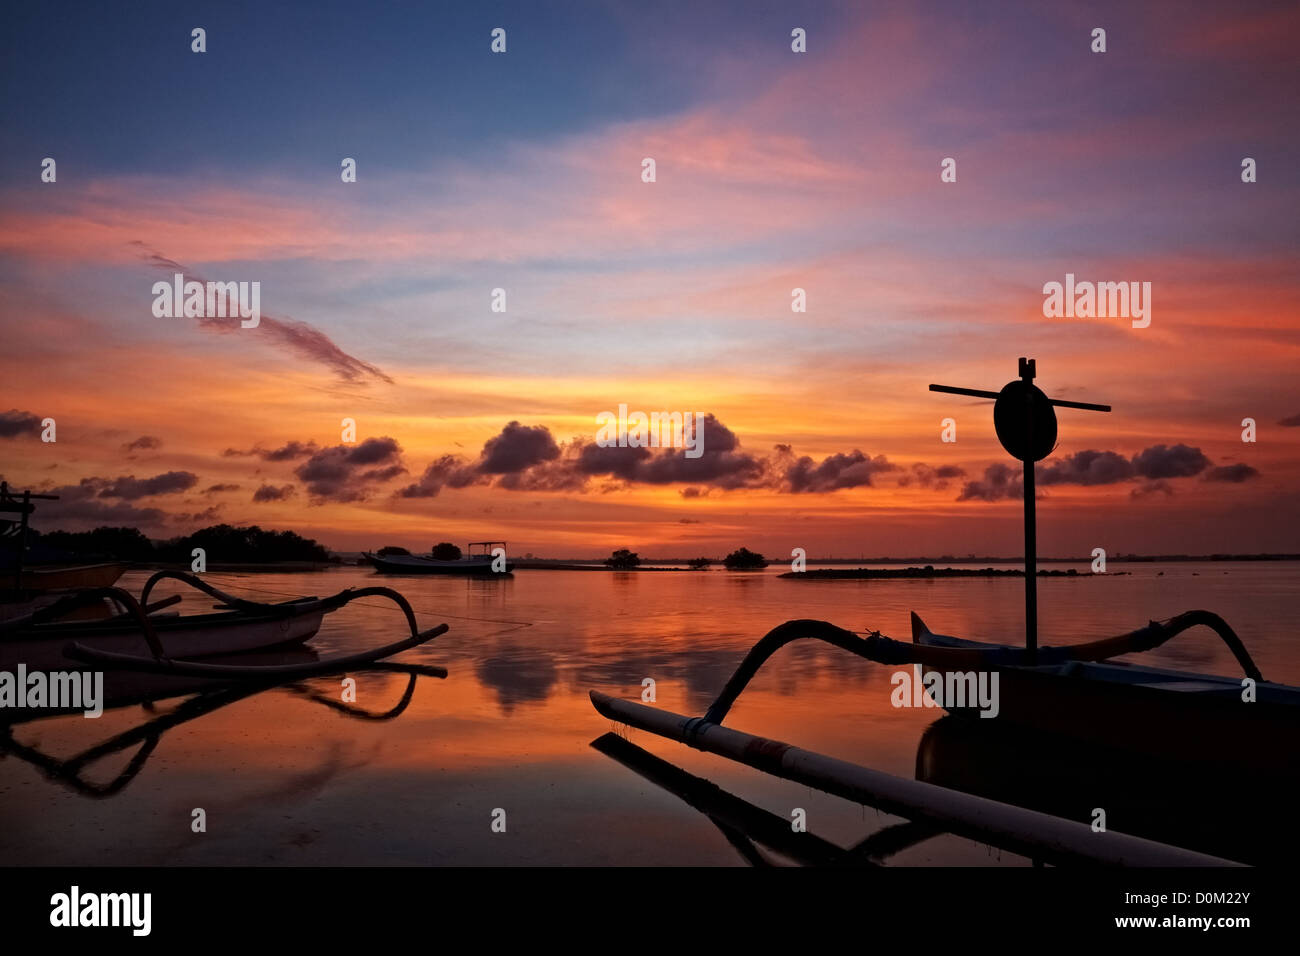 sunset over traditional fishing boats on Bali, Indonesia Stock Photo